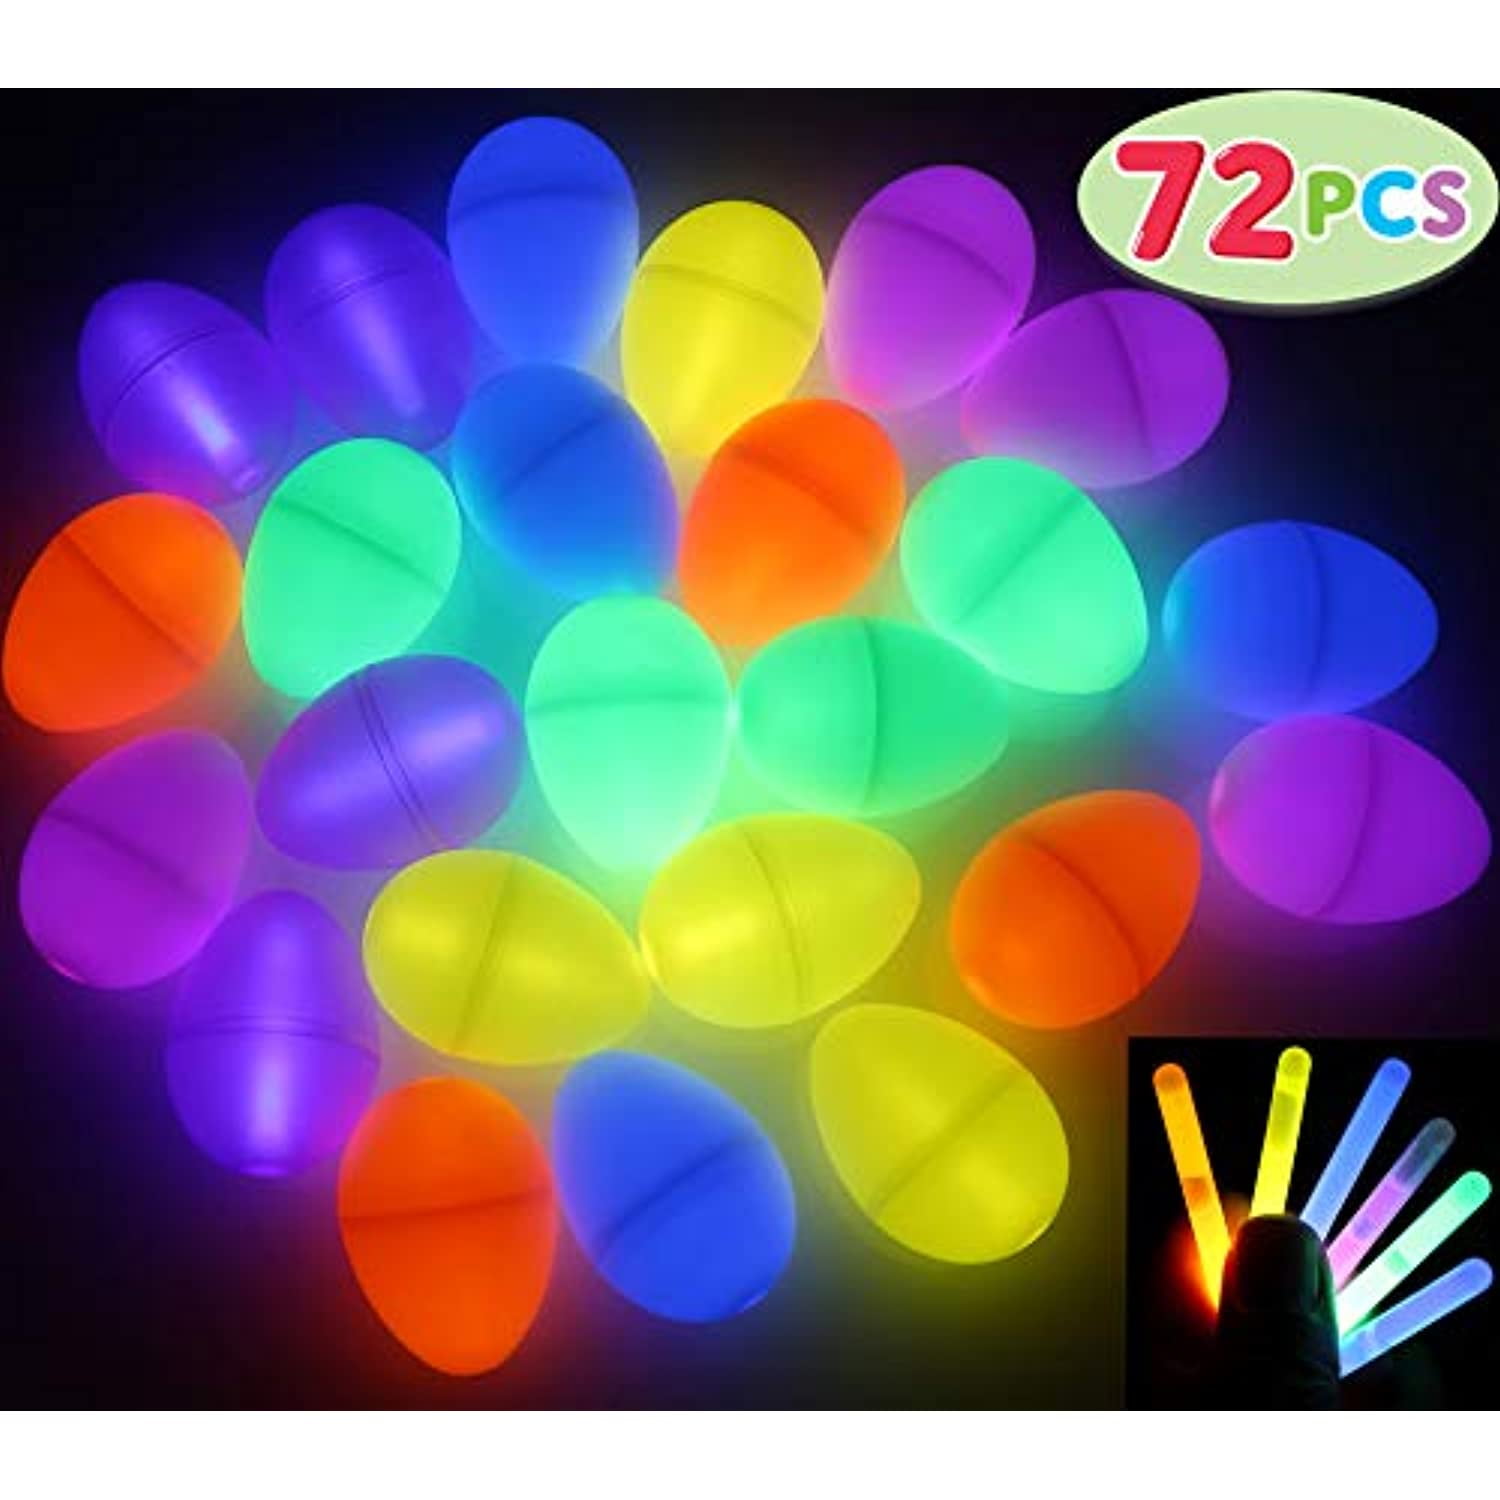 Easter Basket Stuffers Fillers Gift Classroom Prizes. Easter Eggs Theme Hunt Game Party Favors Decorations Supplies 72 PCs Easter Eggs with Mini Glow Sticks for Kids Glow-in-The-Dark 